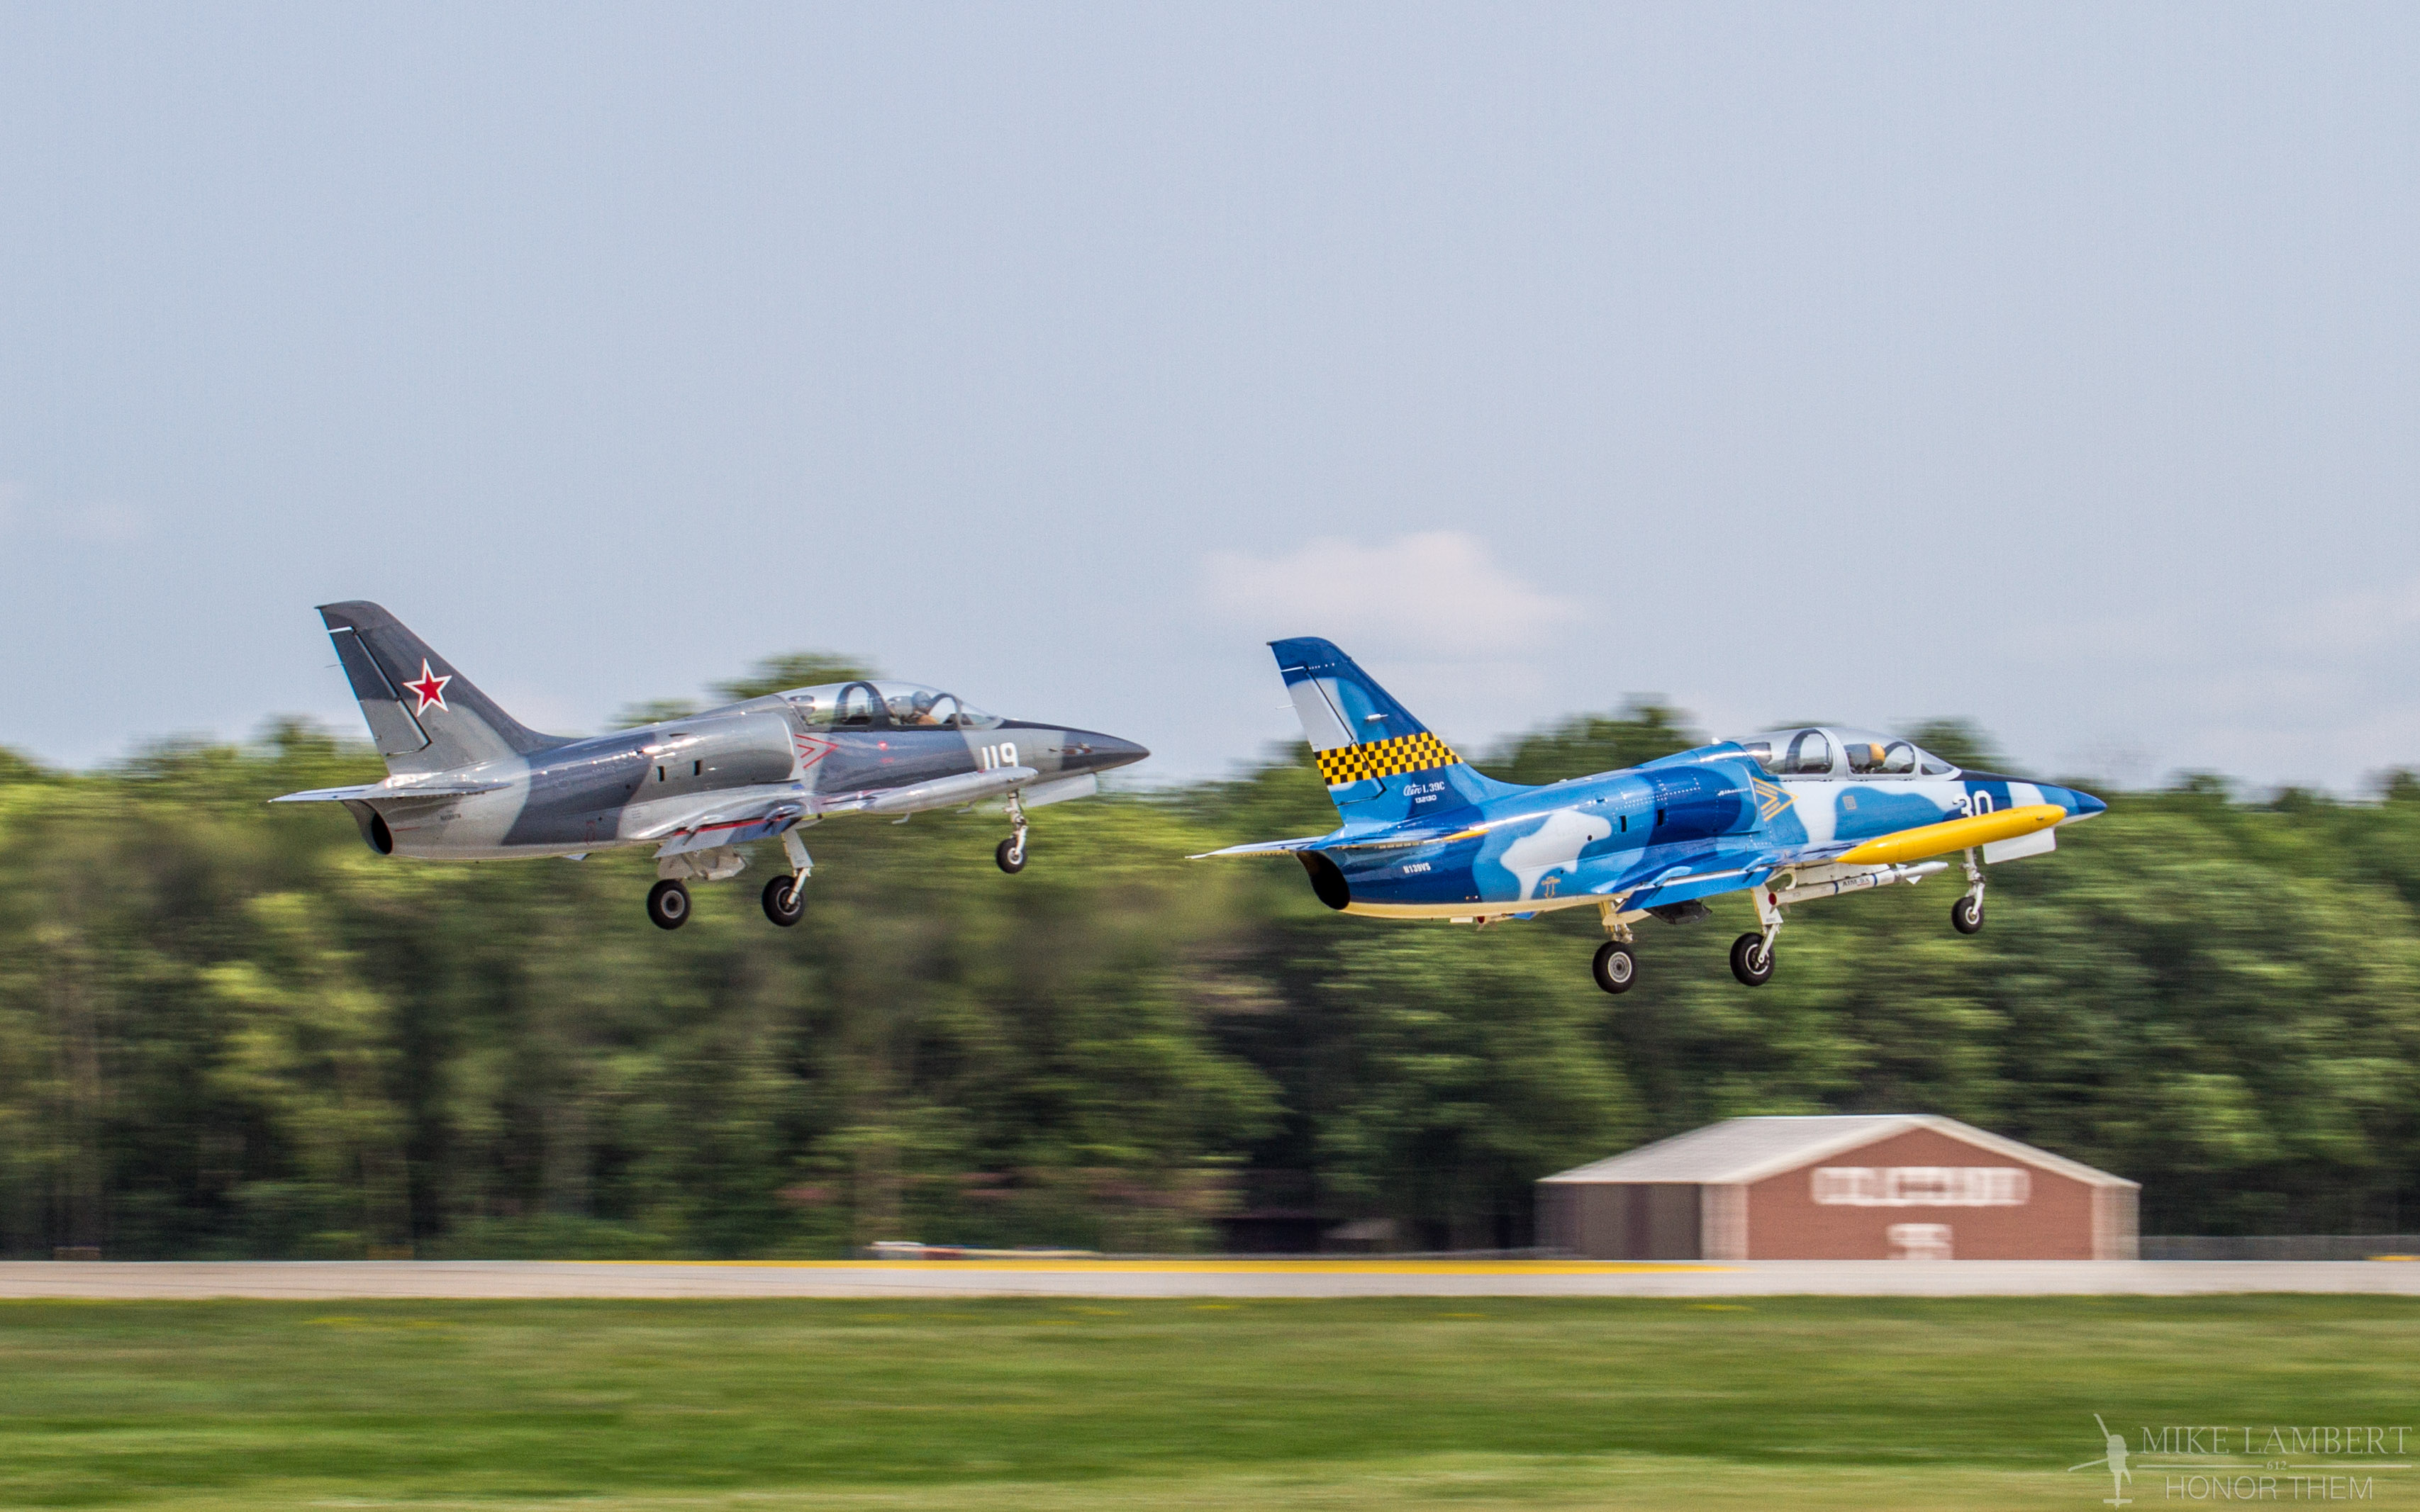 Ron Staley's L-39 (Blue/Yellow) is number taking off for a show at Oshkosh, WI.